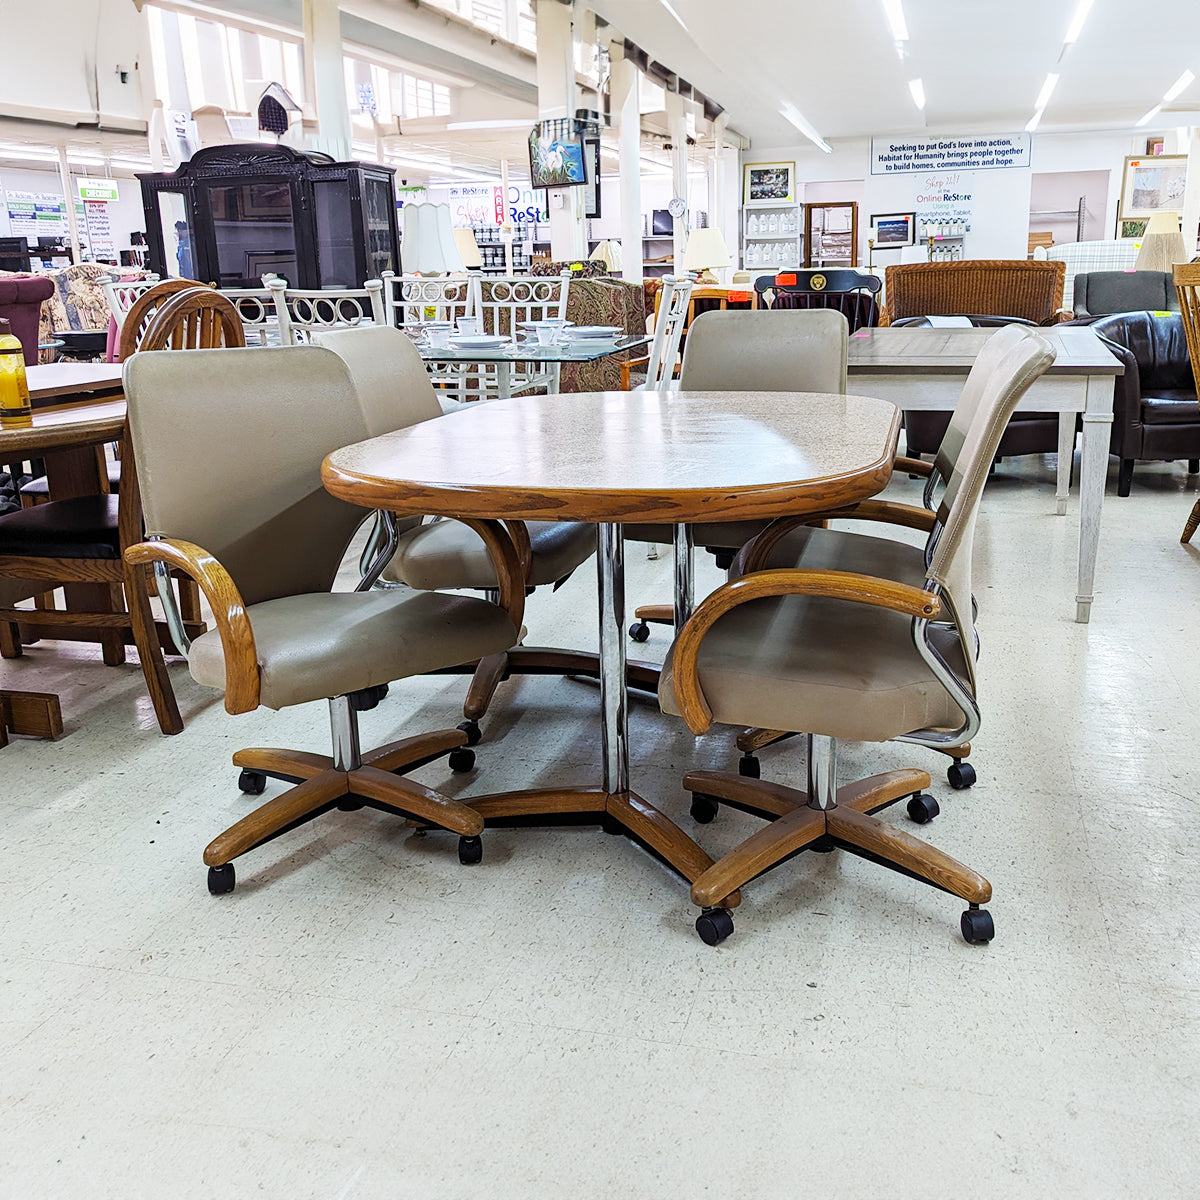 Vintage Gaming Table + 5 Chairs on Castors - Habroc - Online ReStore